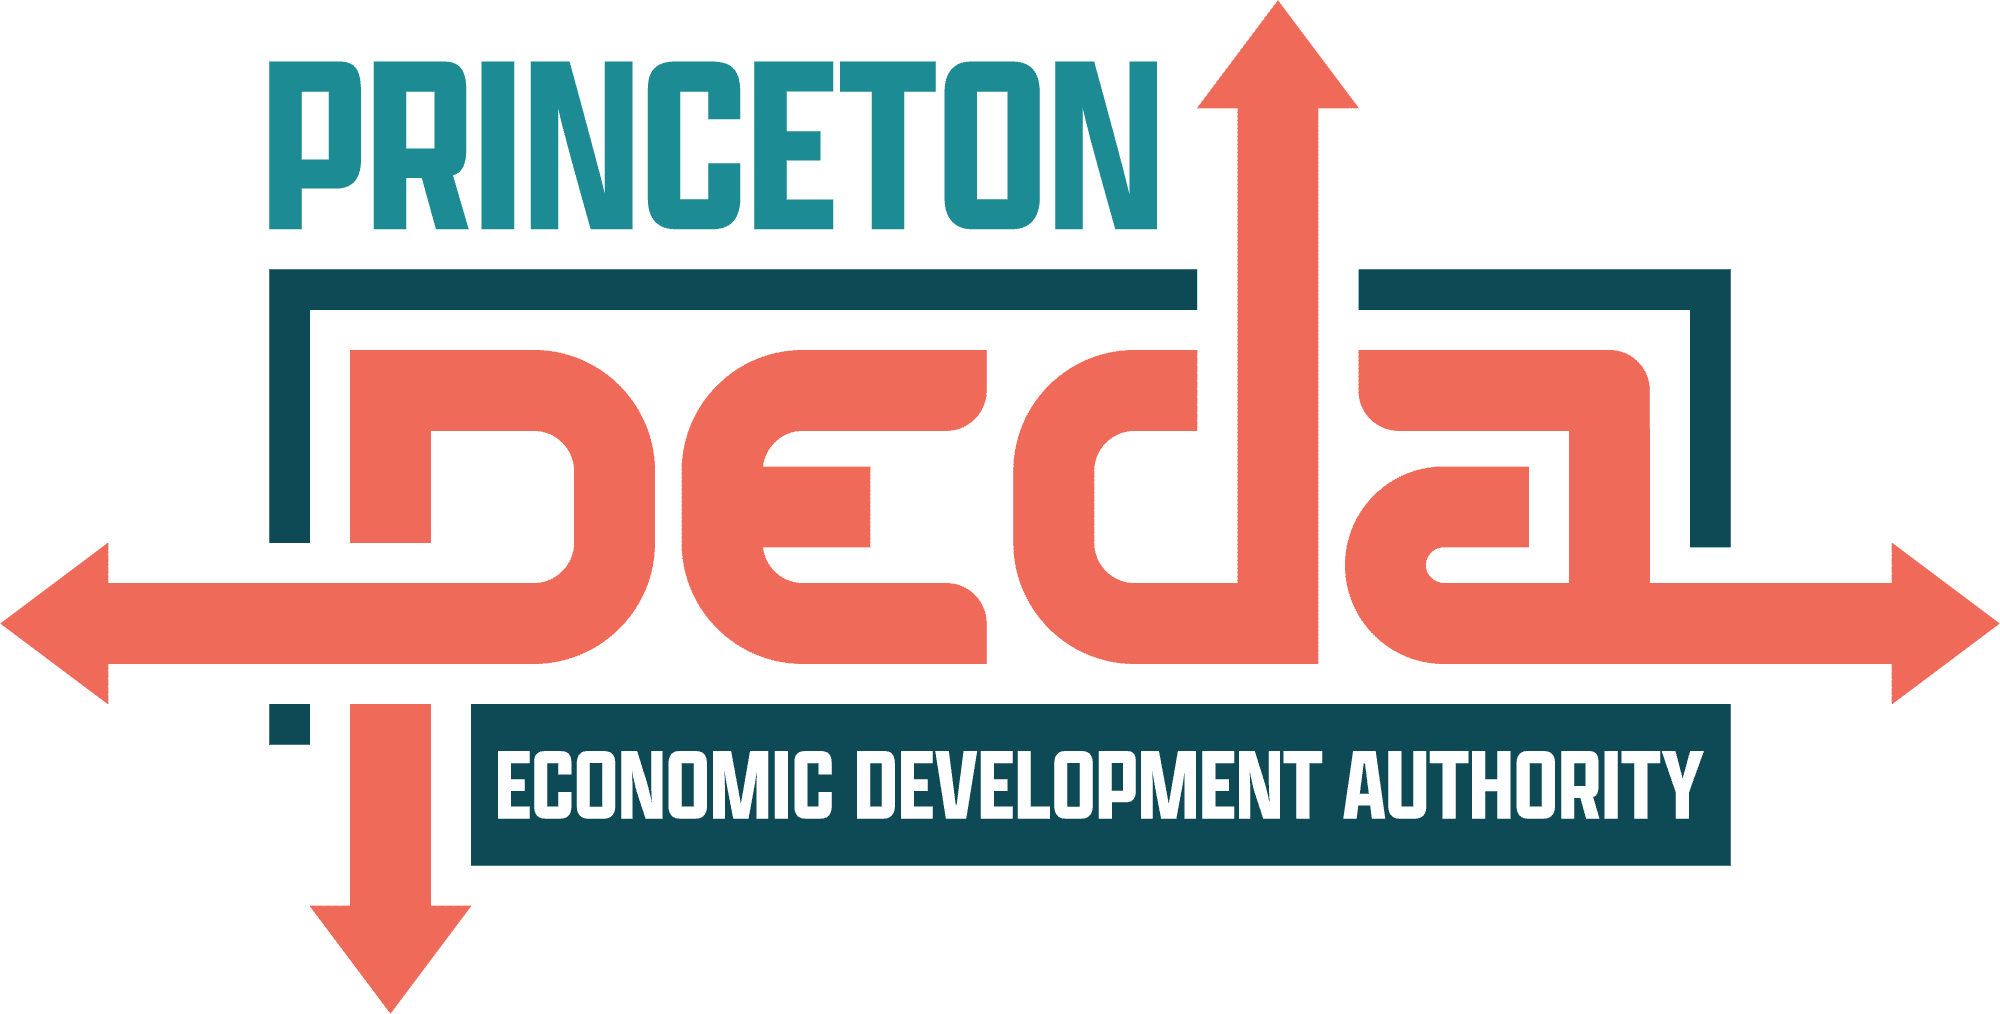 This is the logo for Princeton Economic Development Authority. From the top, Princeton is displayed in light green. There is a dark green border under it. Inside of the border is the acronym PEDA, with an arrow pointing left from the P, an arrow pointing up from the D, and an arrow pointing right from the A. PEDA is in orange. Underneath, you see a dark green box with "Economic Development Authory" in white.